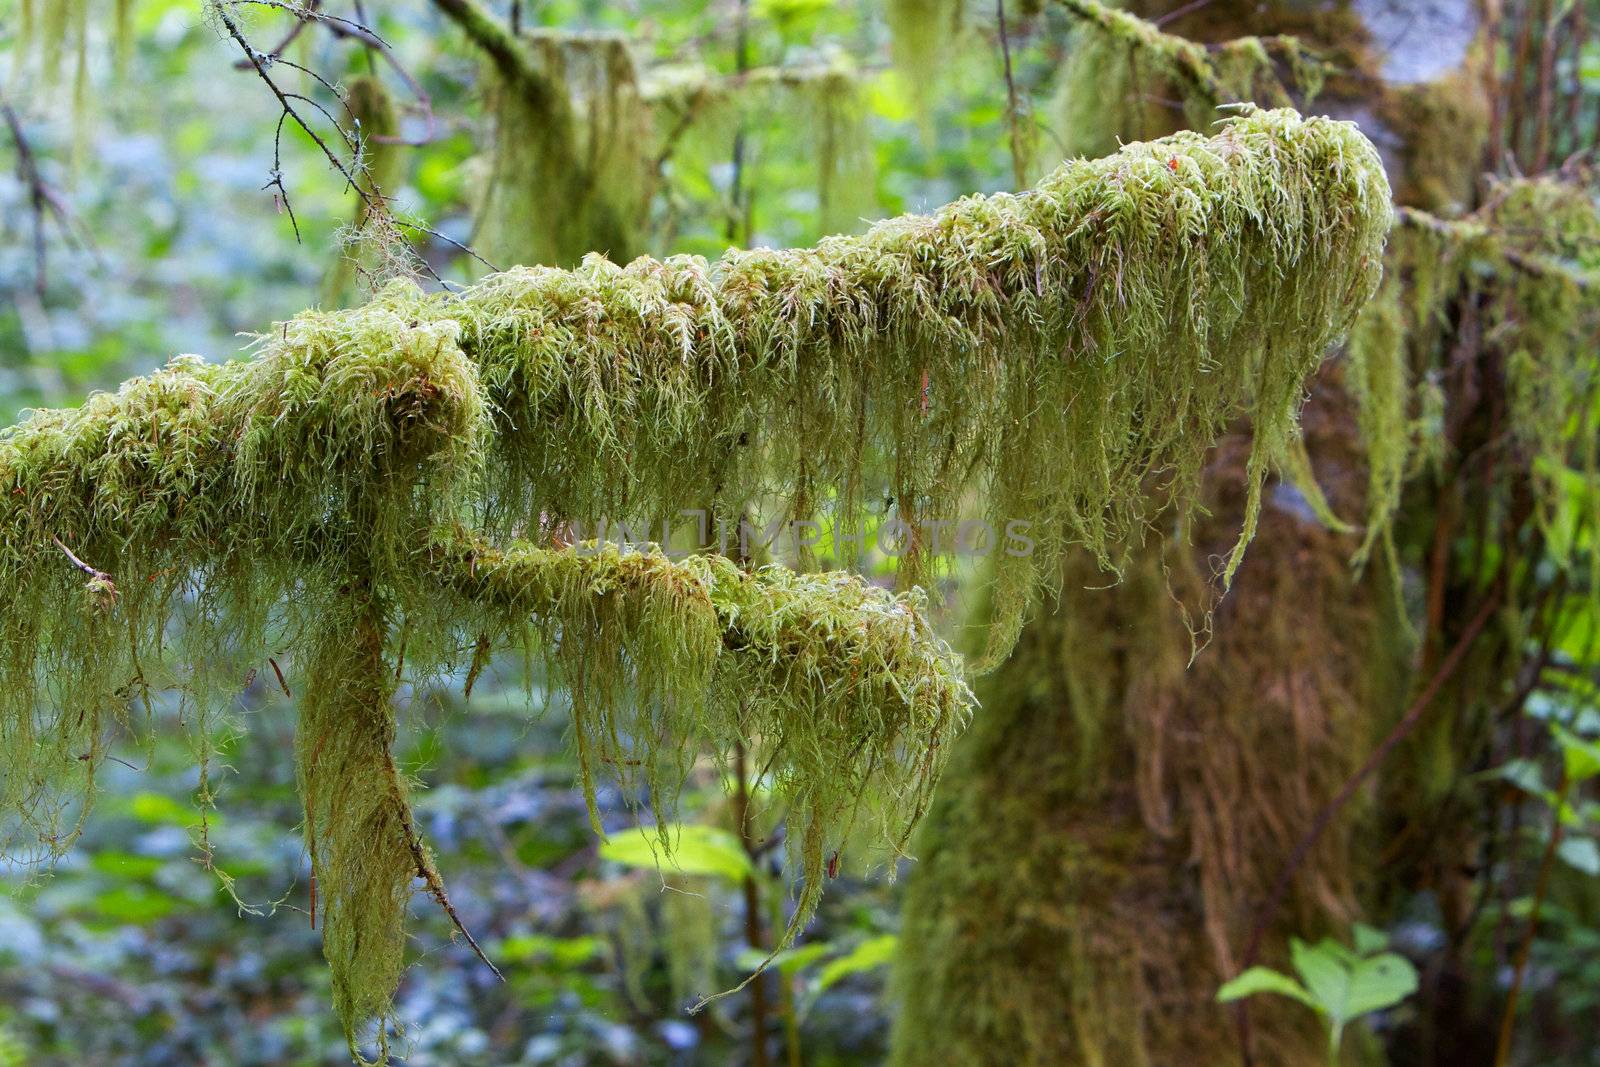 Spanish Moss Branch hanging from several branches with on in focus